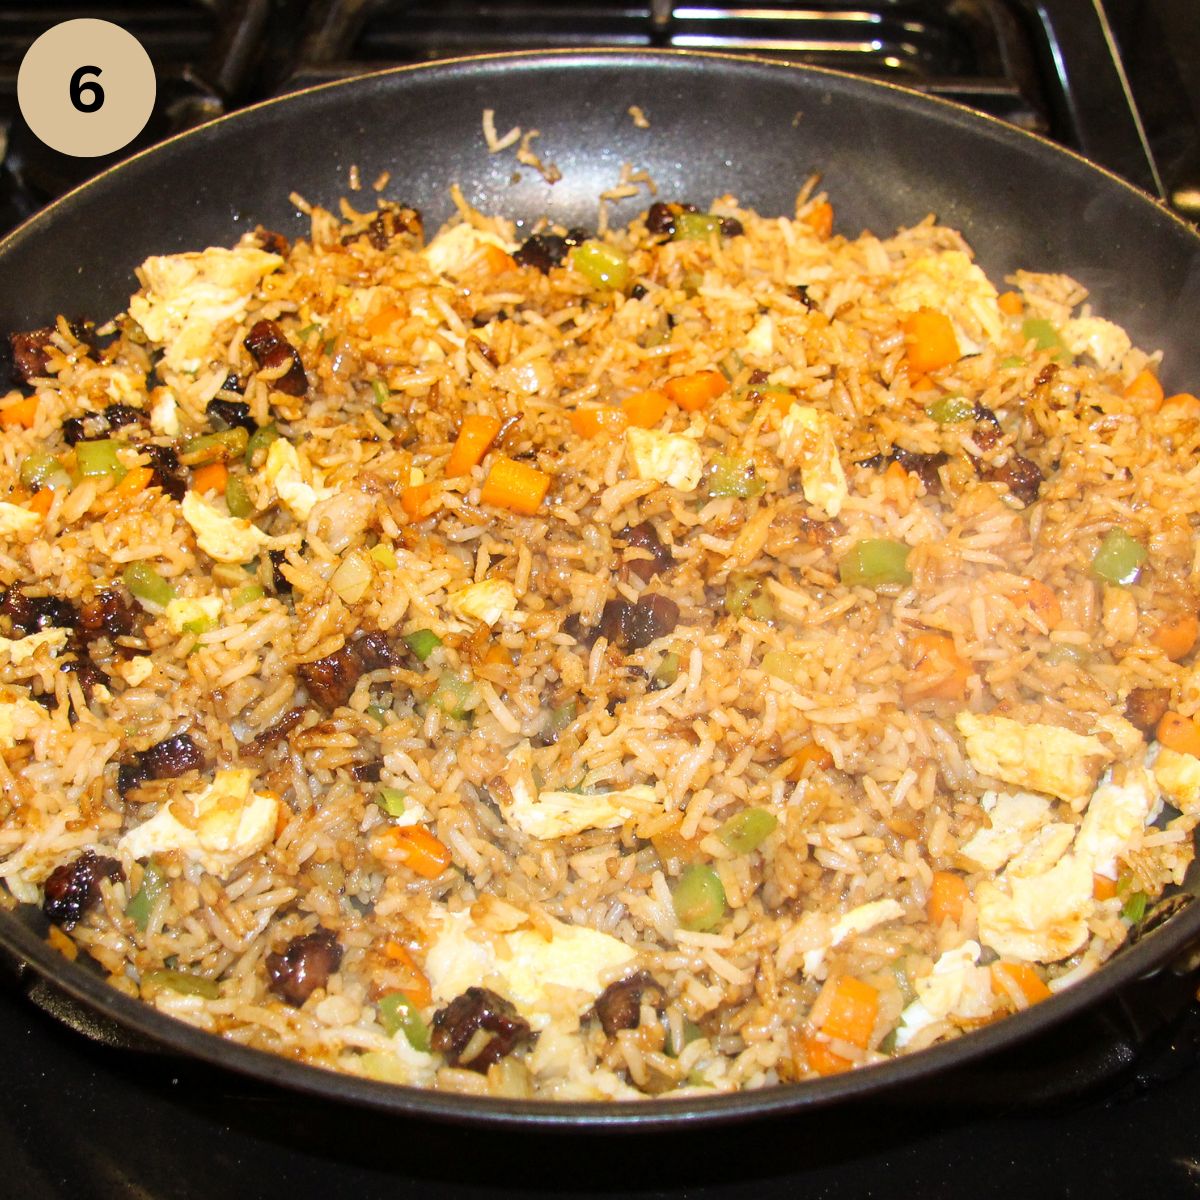 adding eggs and pork pieces to fried rice in the pan.